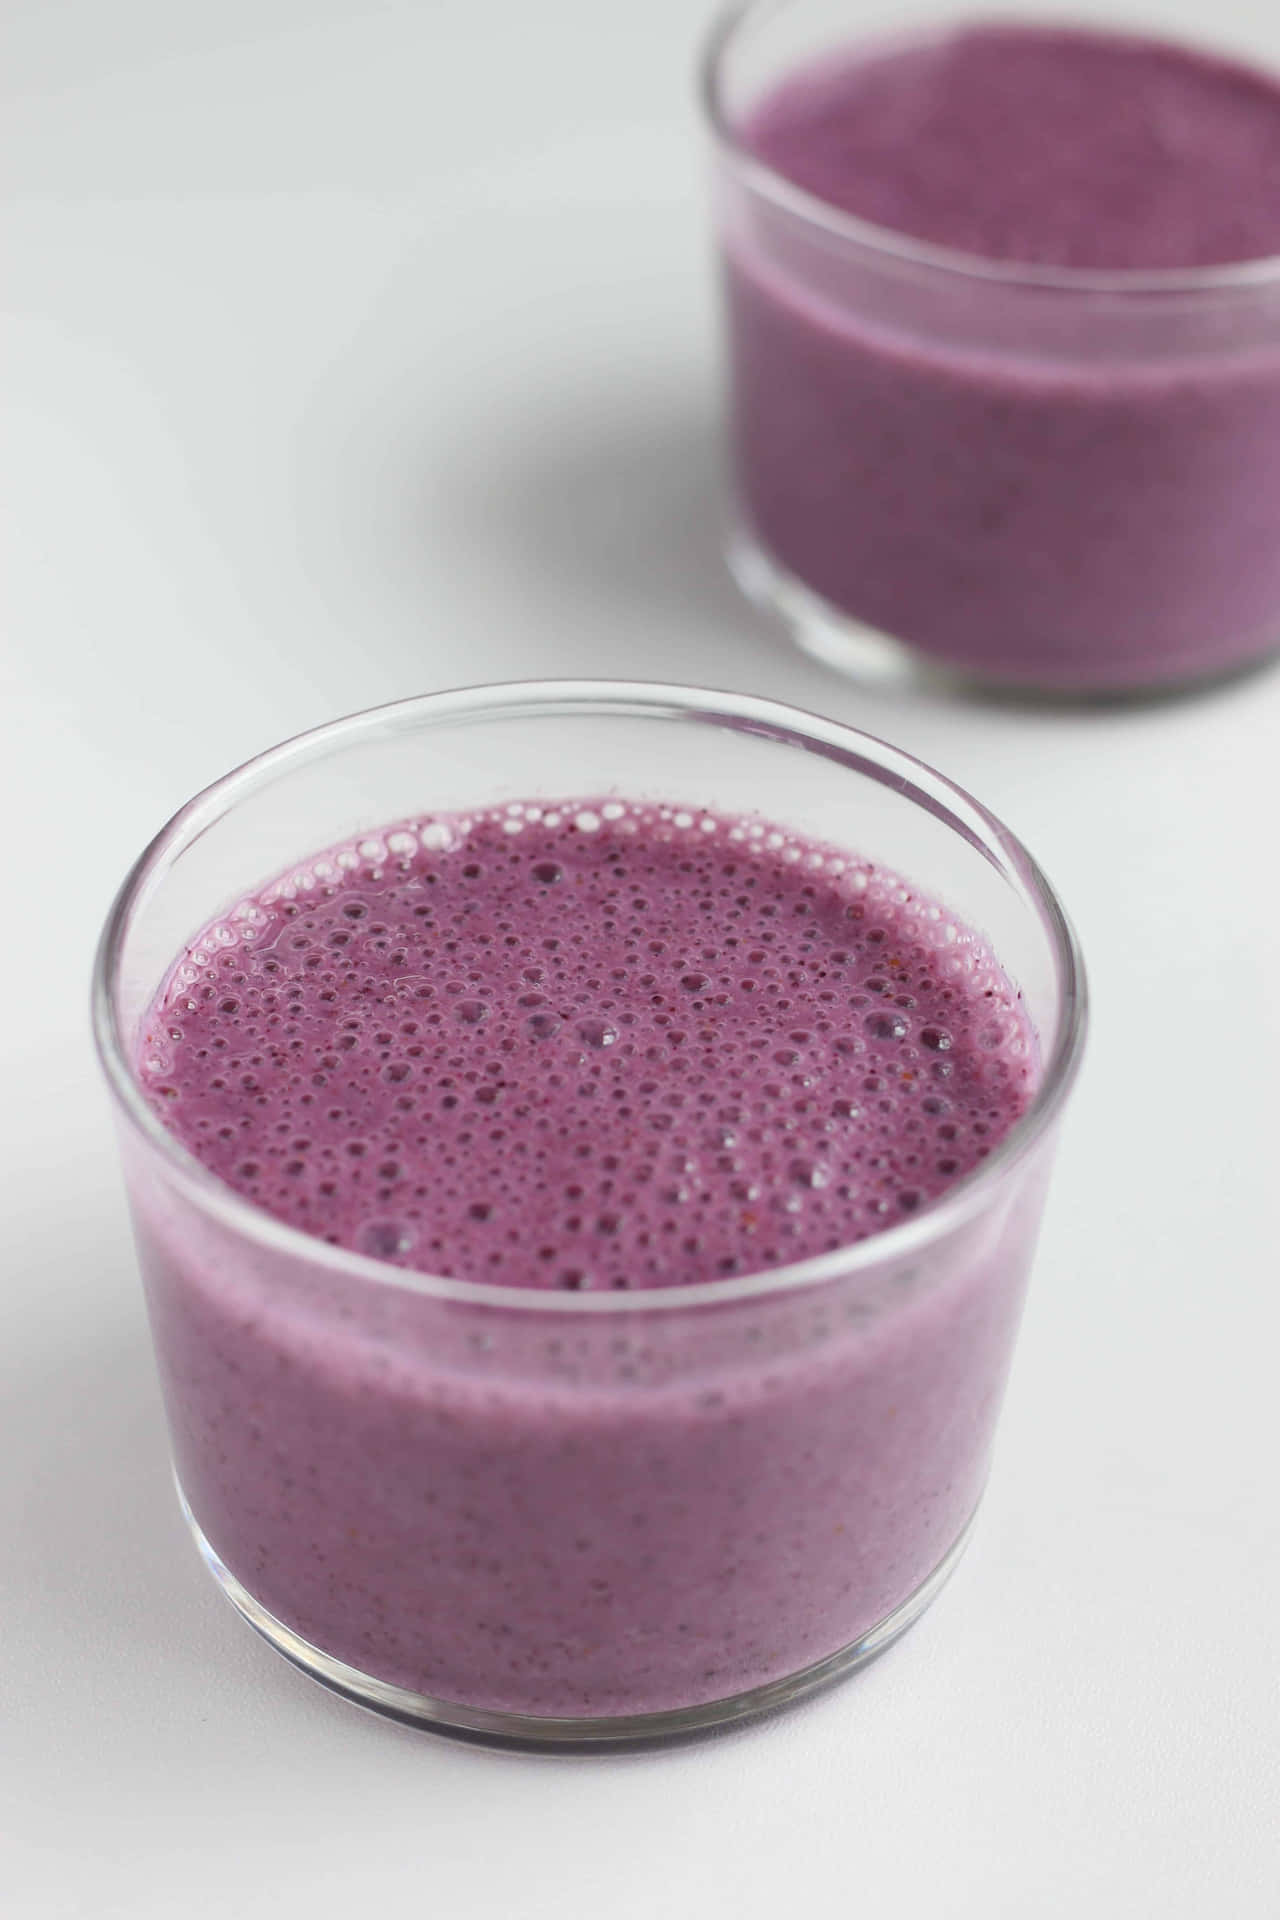 Enjoy a healthy and delicious blueberry smoothie Wallpaper